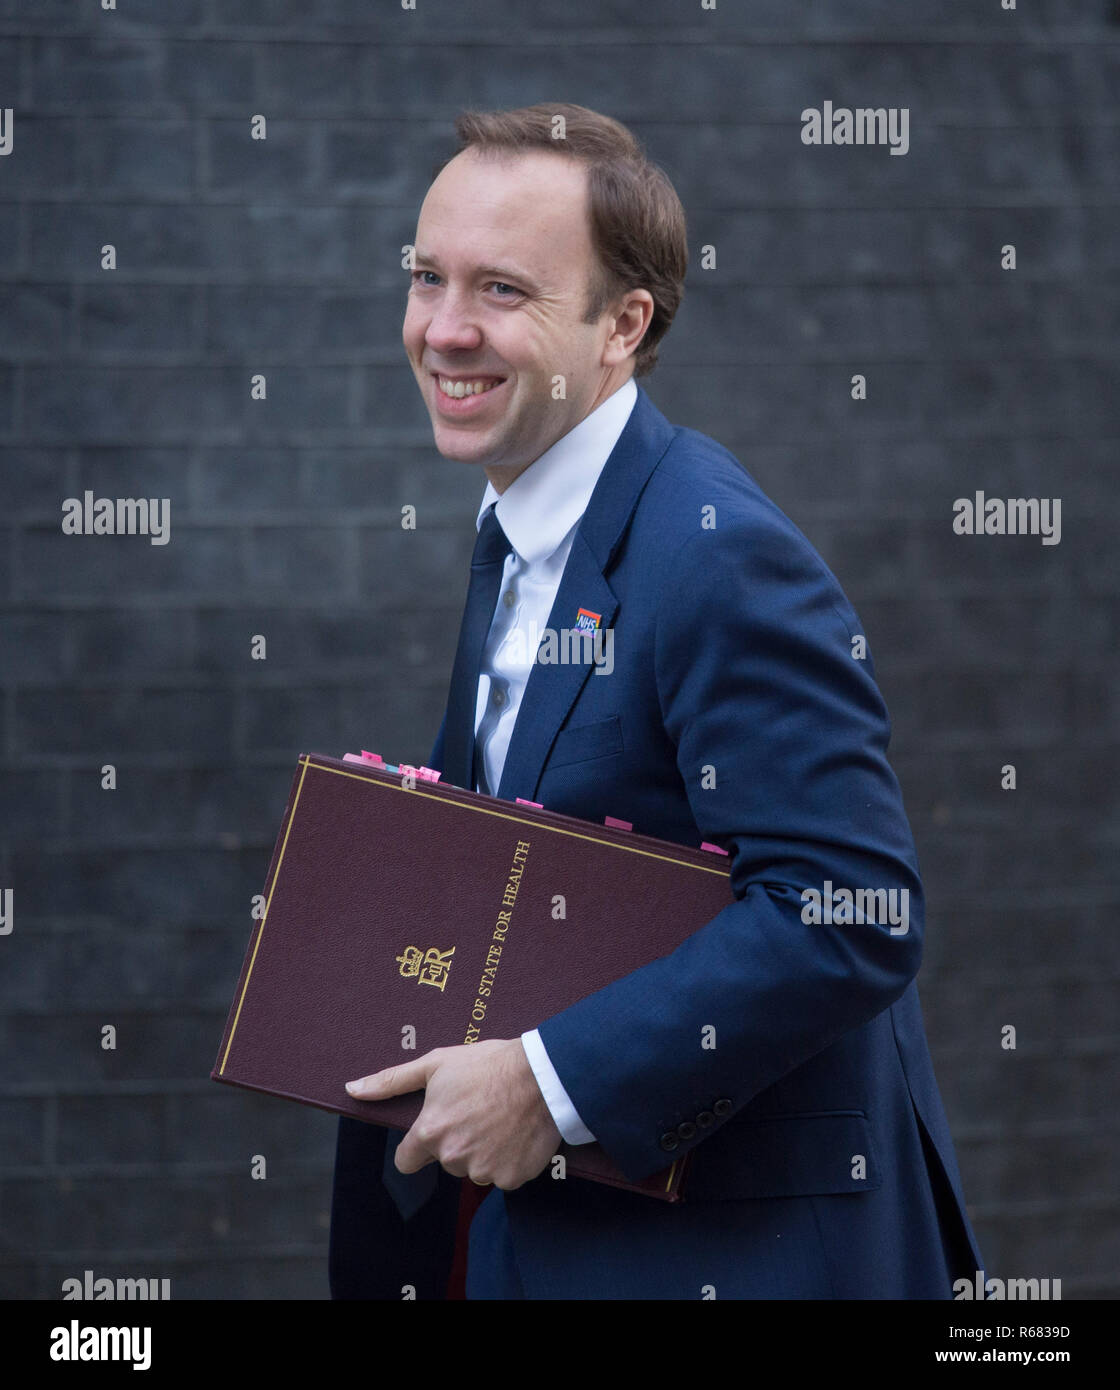 Downing Street, London, UK. 4 December 2018. Matt Hancock, Secretary of State for Health and Social Care in Downing Street for weekly cabinet meeting. Credit: Malcolm Park/Alamy Live News. Stock Photo